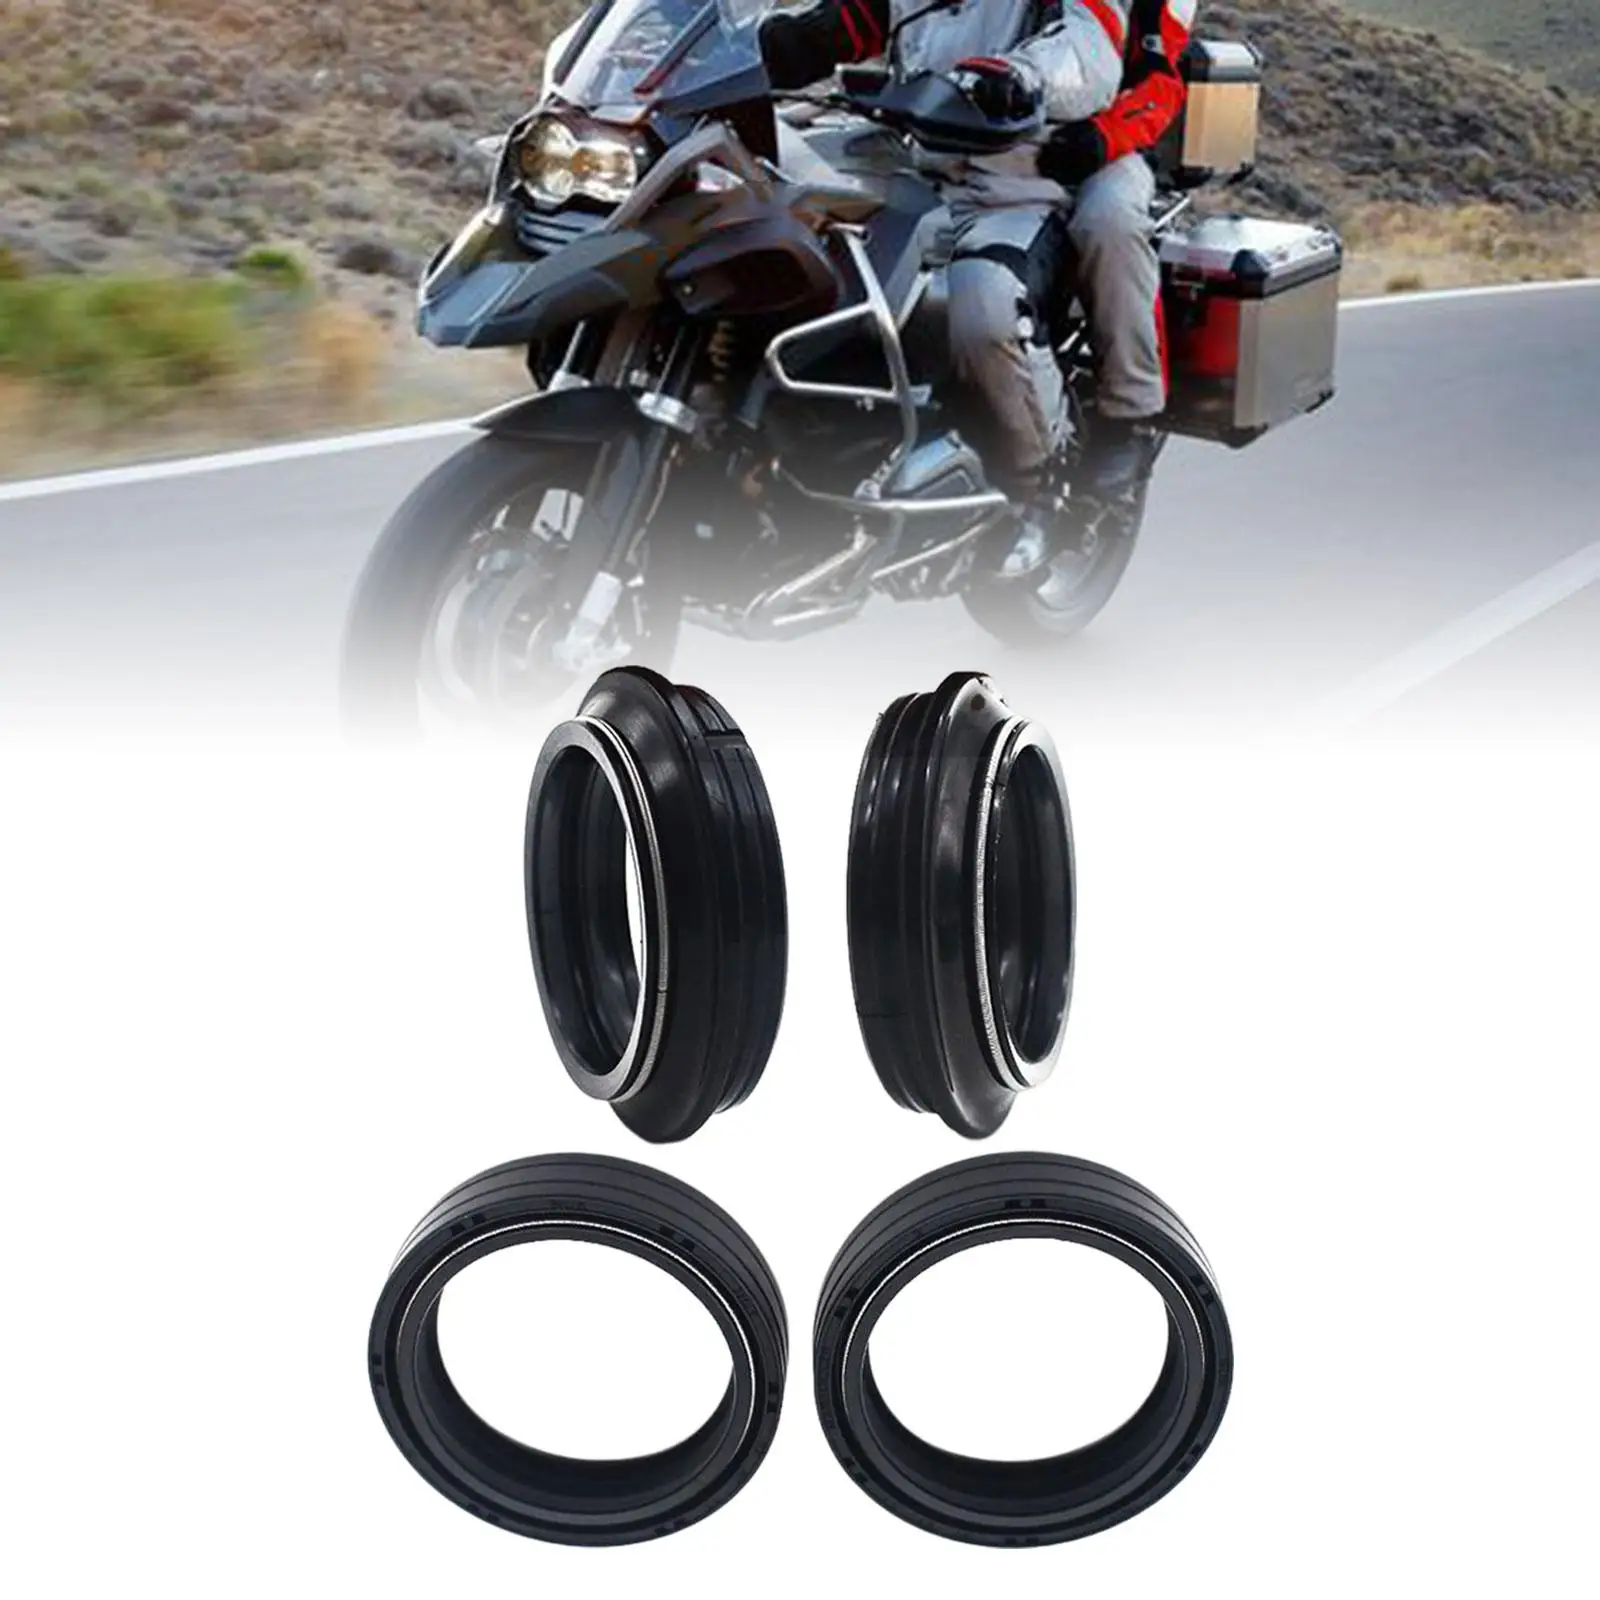 Front Fork Shock Oil Seal and Dust Seal Set Rubber Motorcycle Accessories for